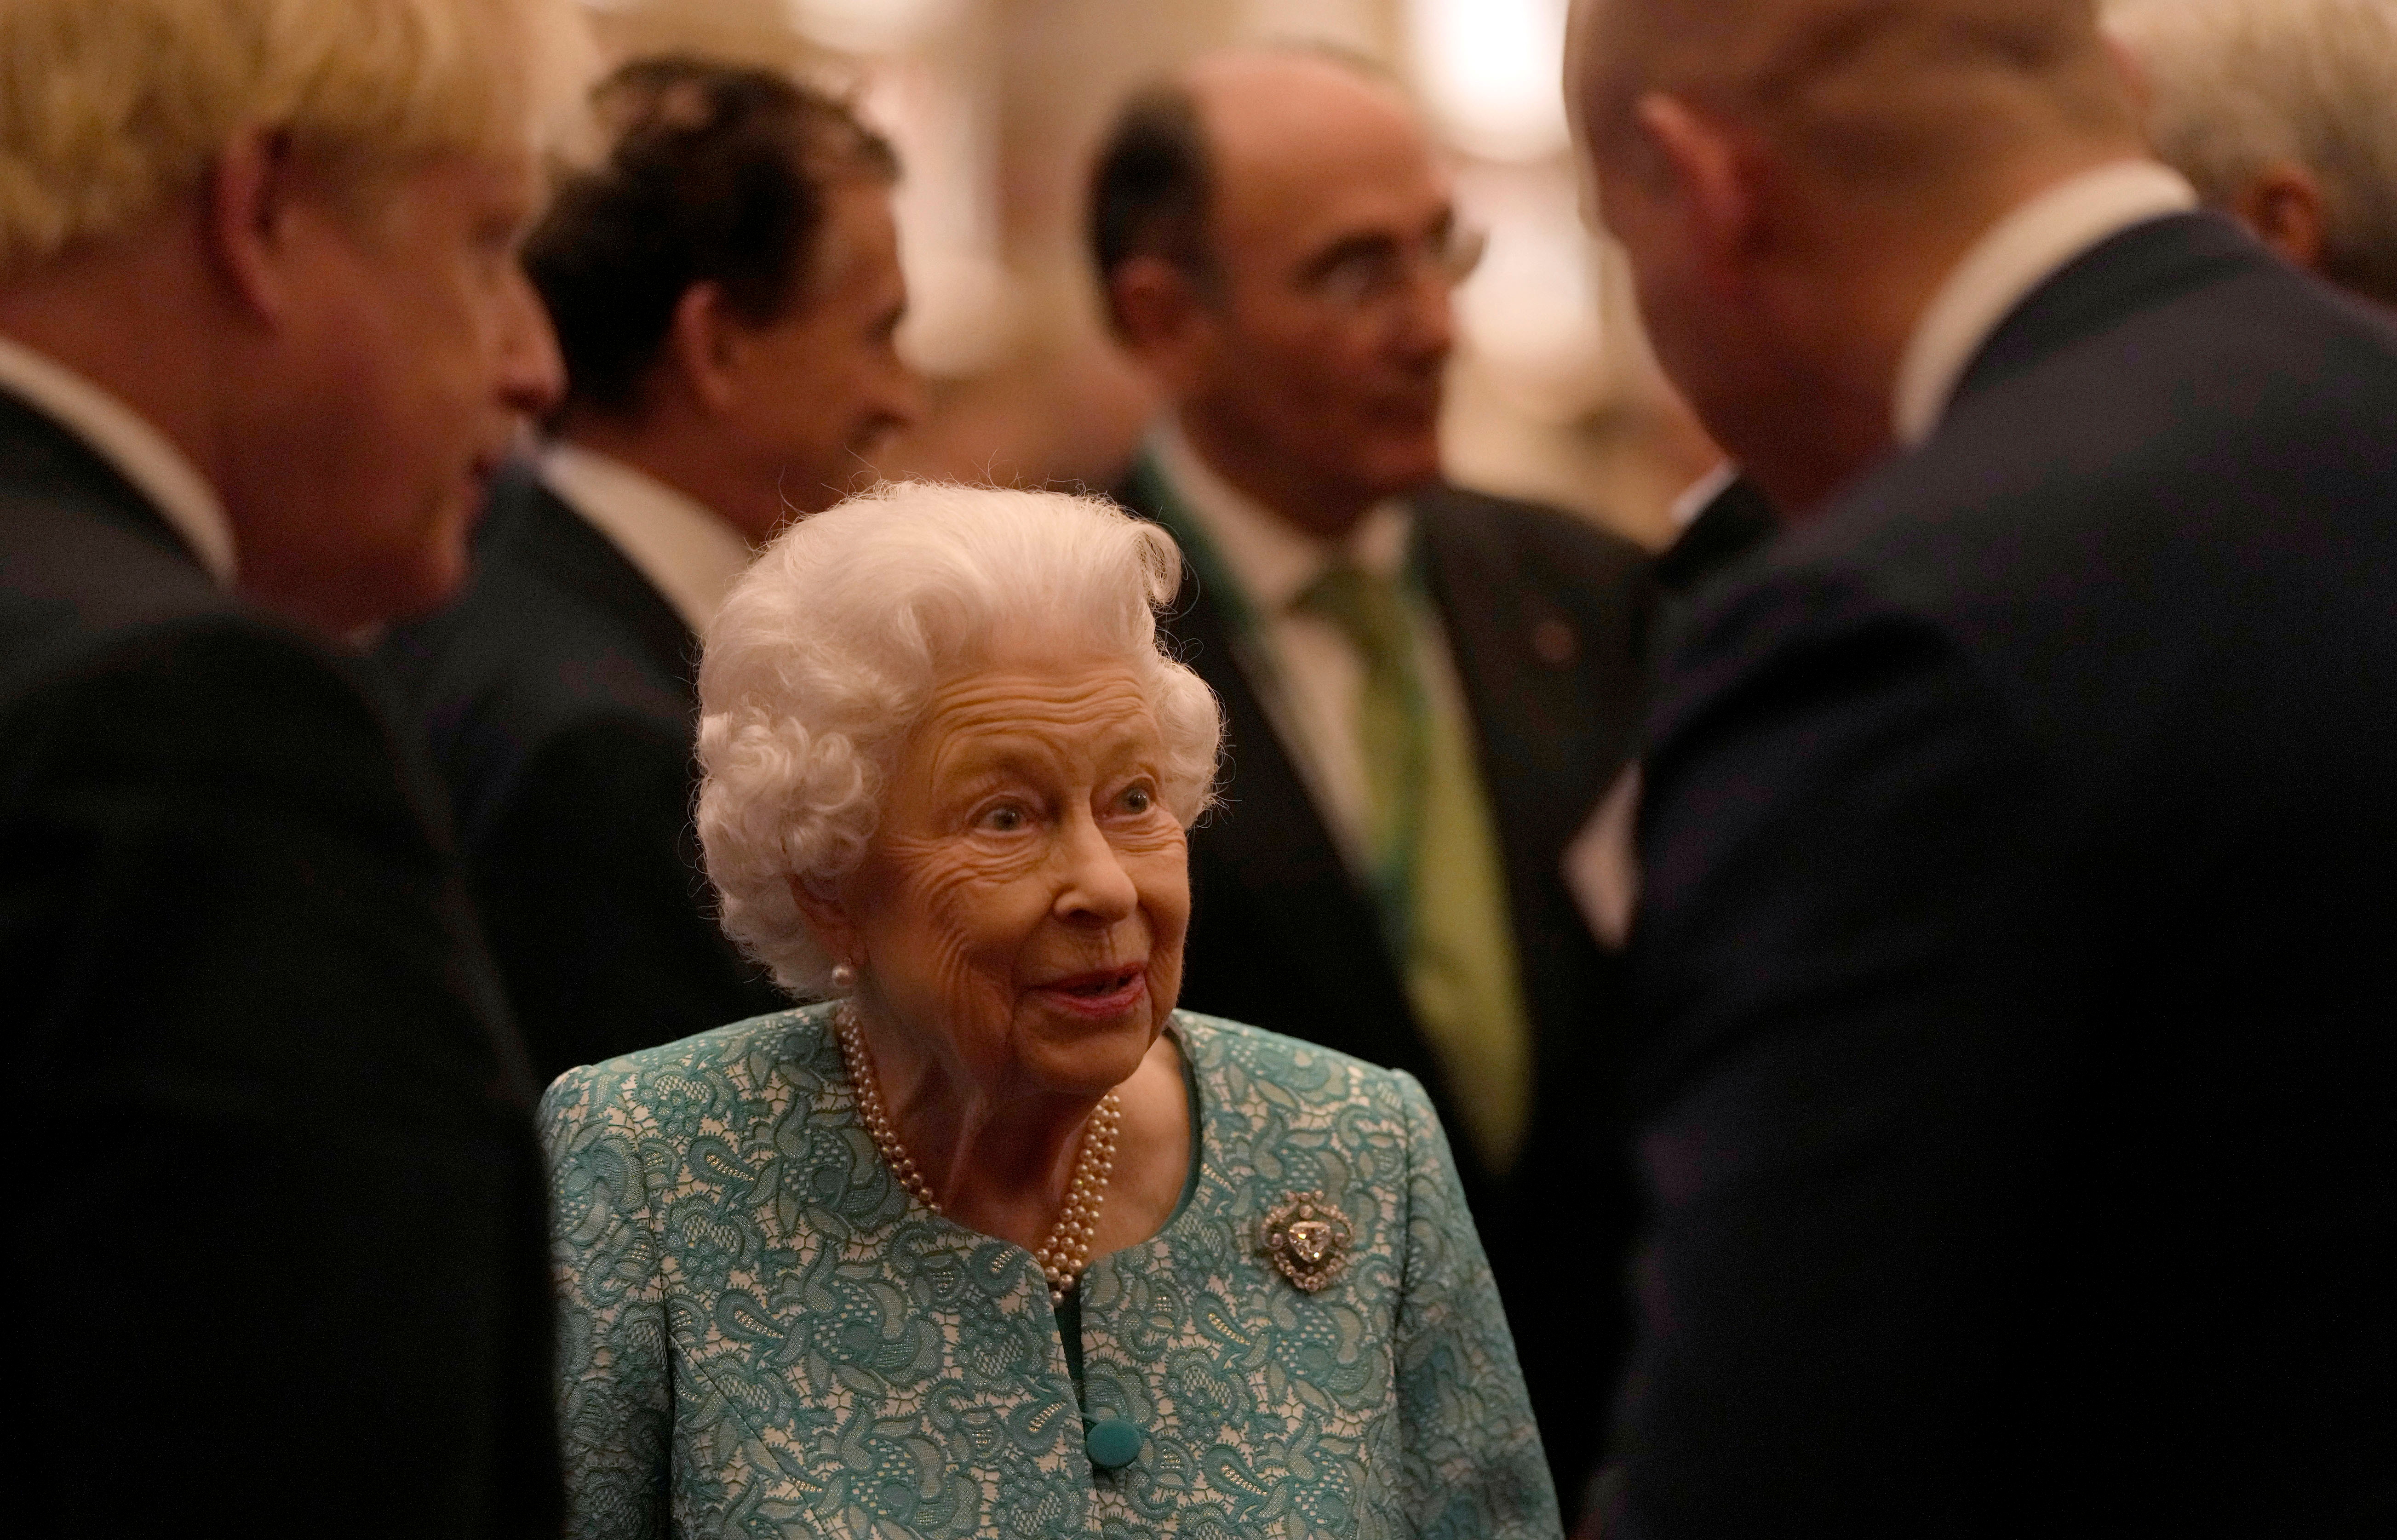 Britain's Queen Elizabeth and Prime Minister Boris Johnson greet guests at a reception for the Global Investment Summit in Windsor Castle, Windsor, Britain, October 19, 2021. Alastair Grant/Pool via REUTERS